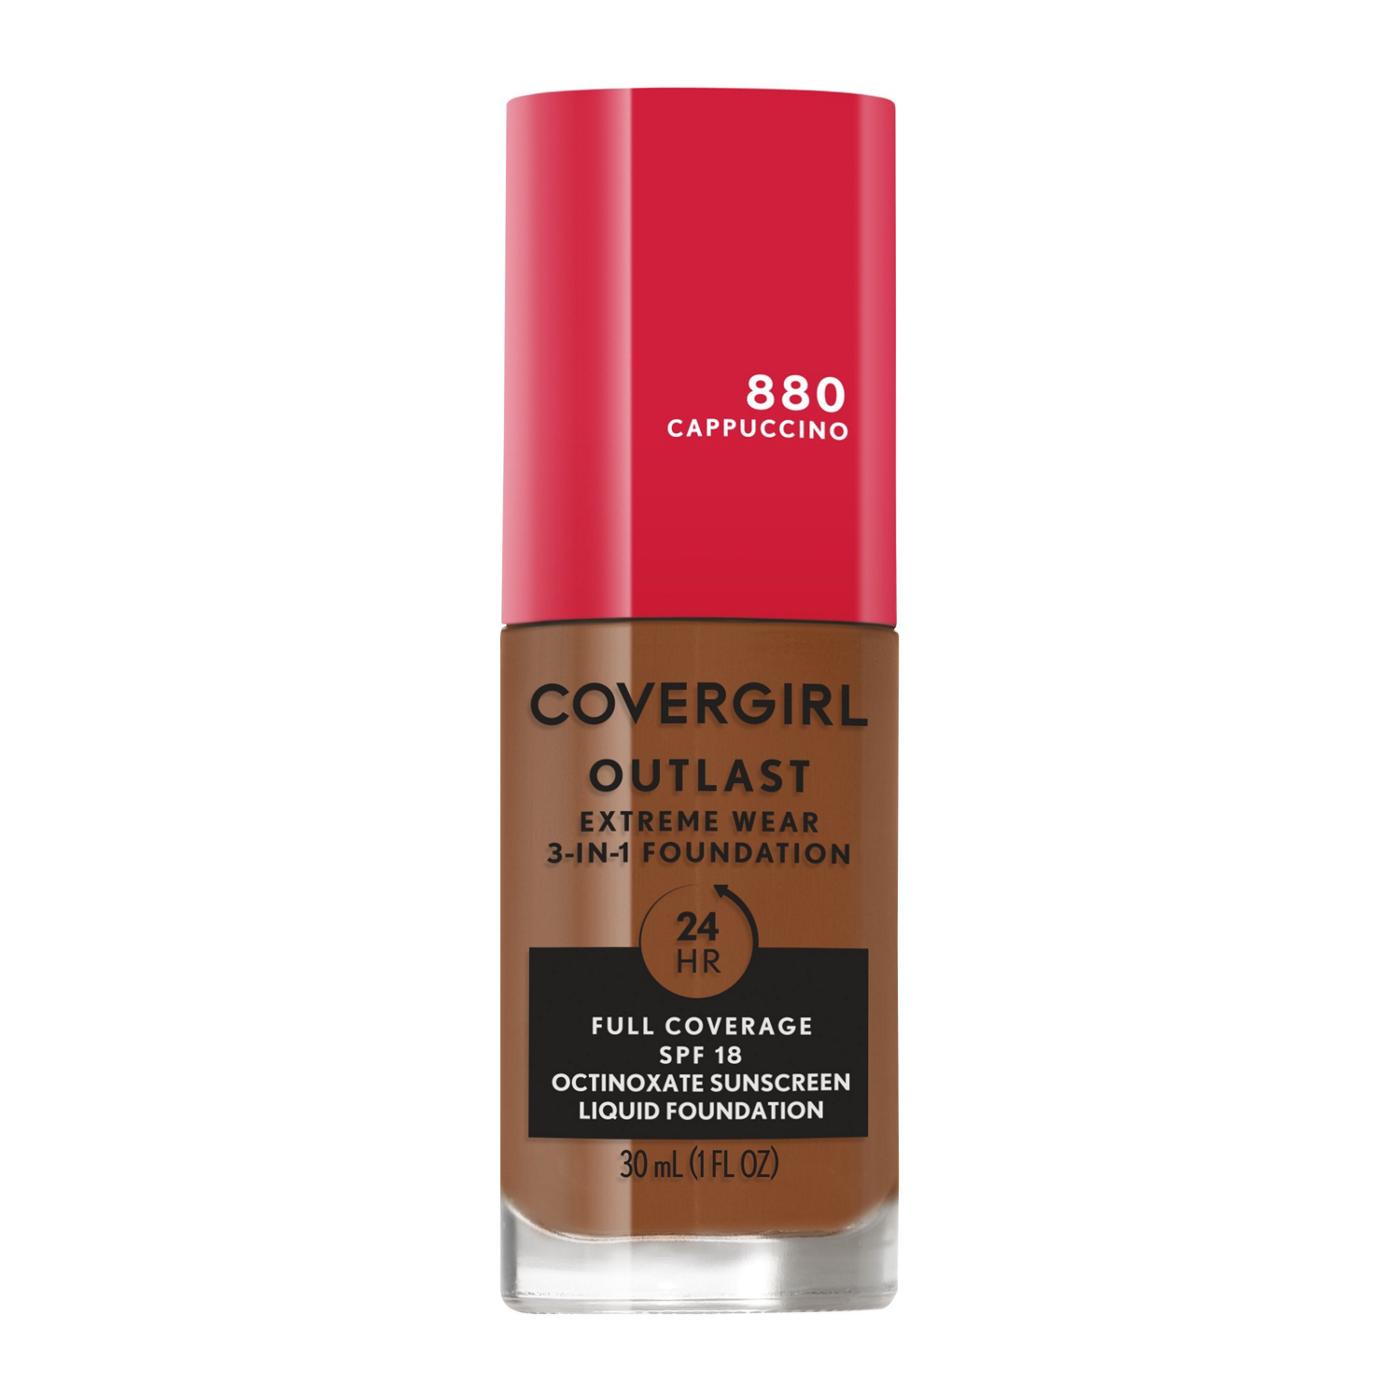 Covergirl Outlast Extreme Wear Liquid Foundation 880 Cappuccino; image 1 of 11